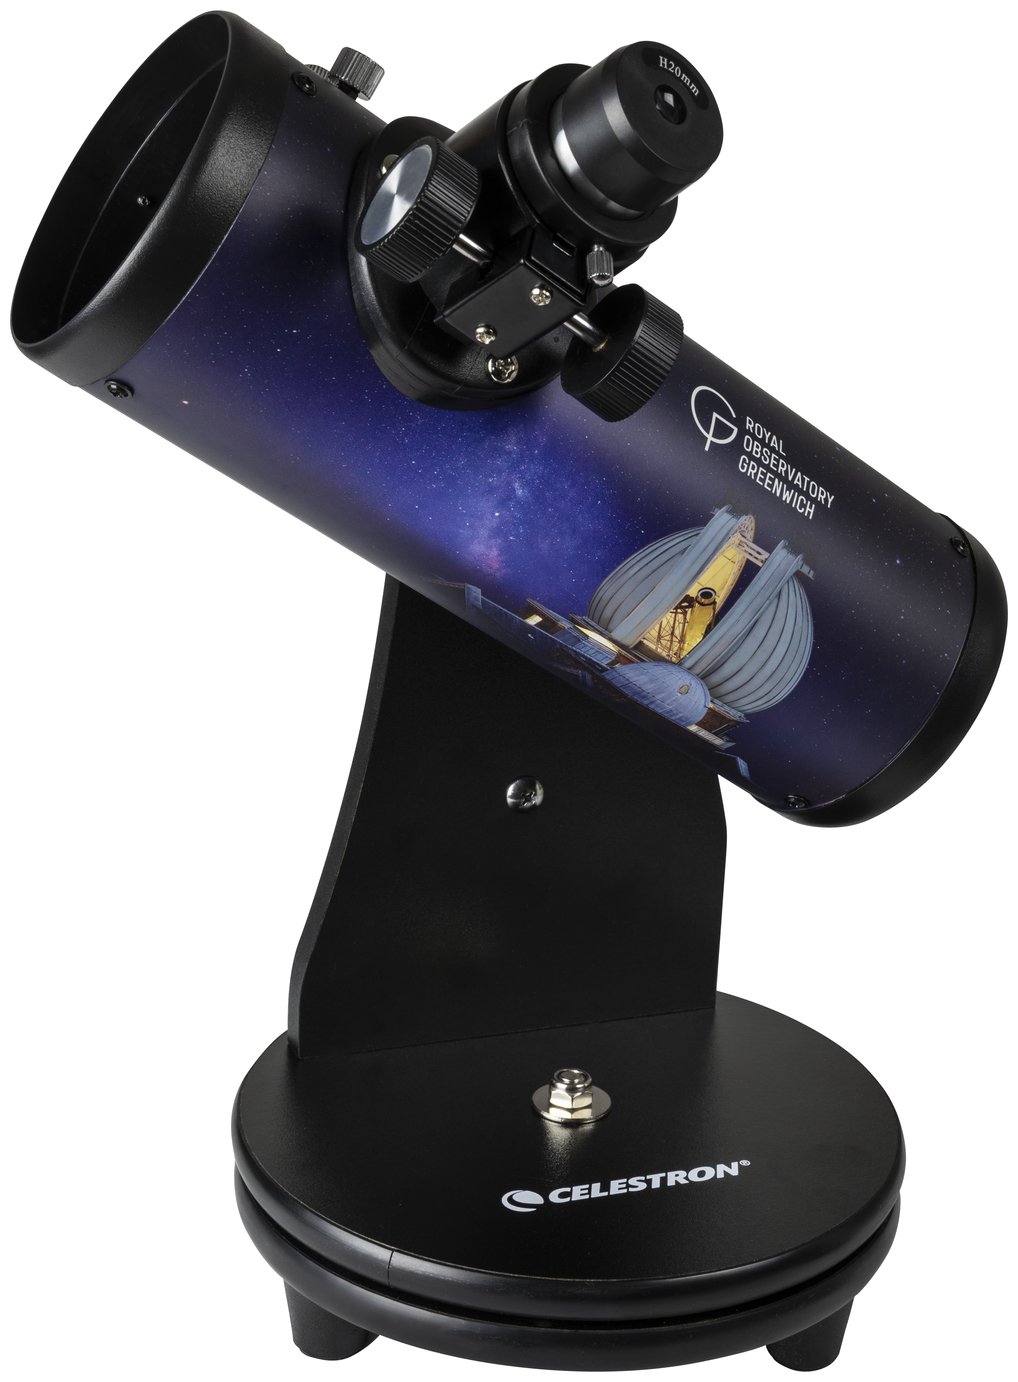 Celestron Royal Observatory Greenwich FirstScope